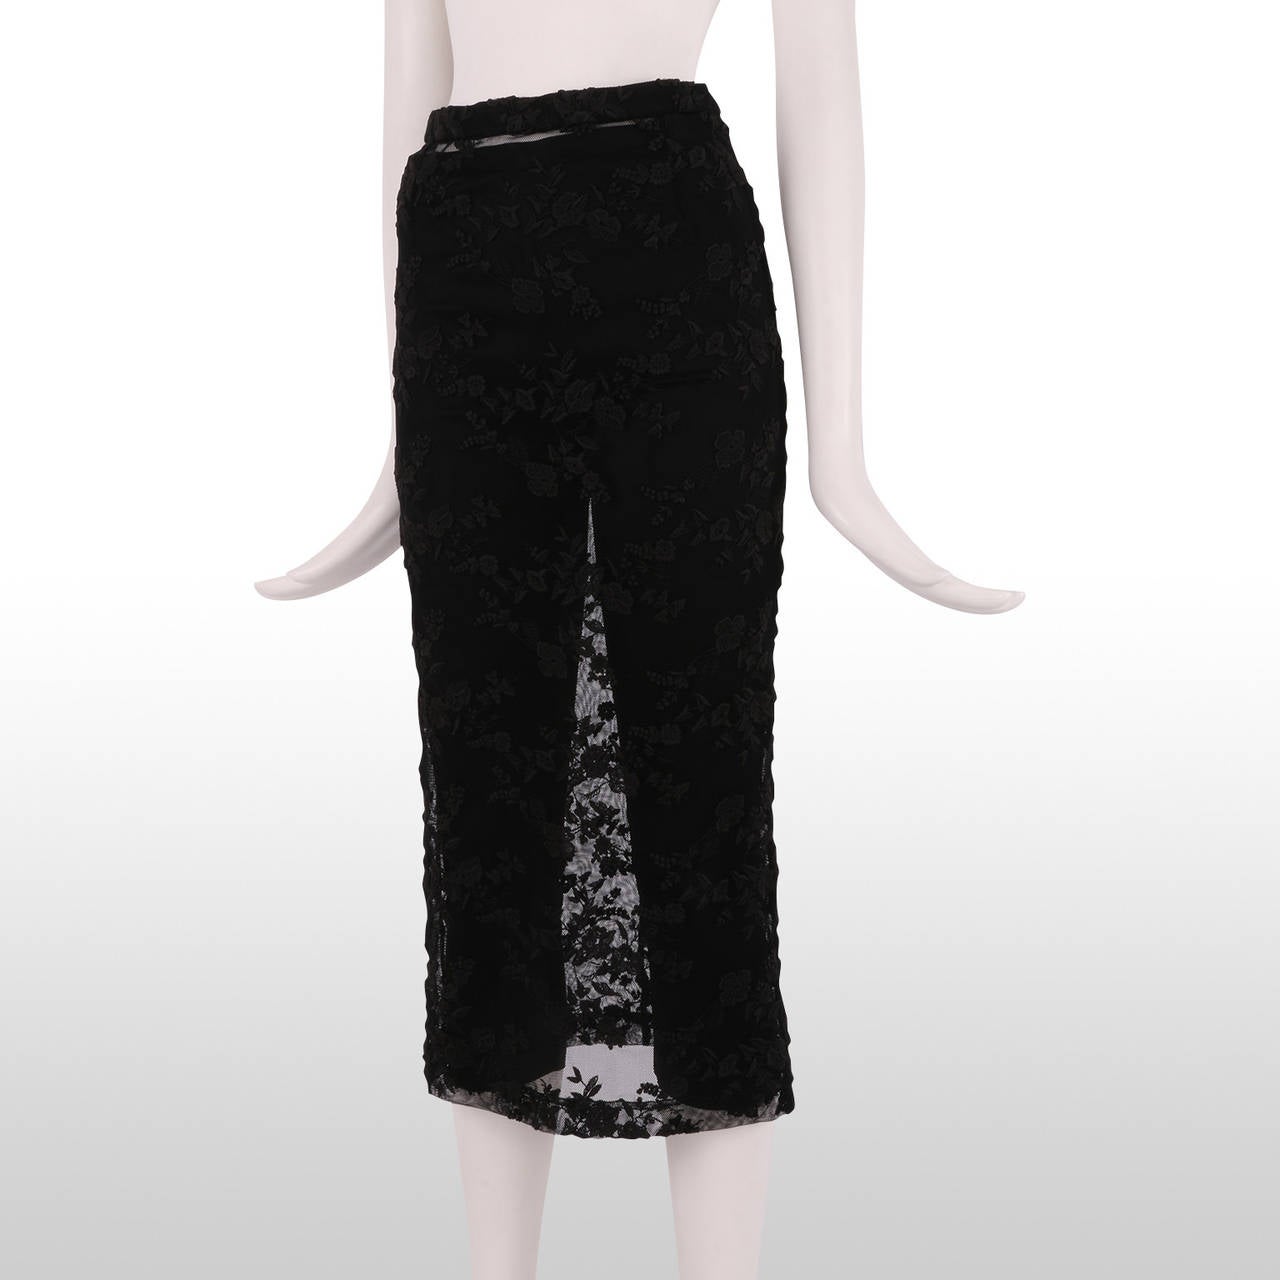 Dolce & Gabbana Black Pedal Pusher Leggings with Lace Skirt Overlay For Sale 1